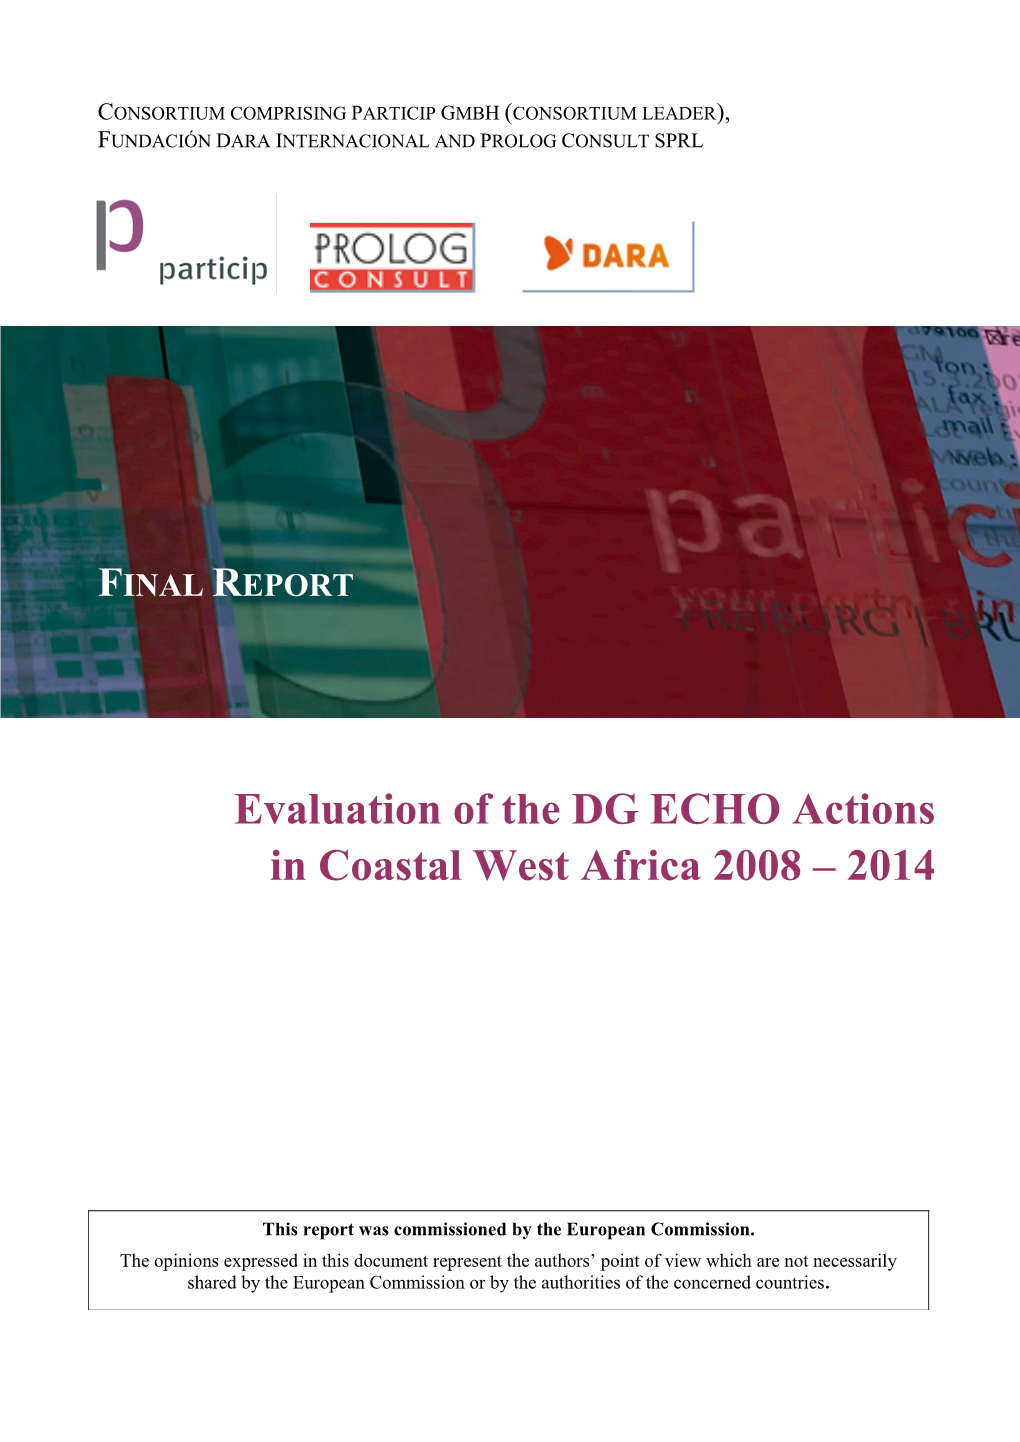 Evaluation of the DG ECHO Actions in Coastal West Africa 2008 – 2014